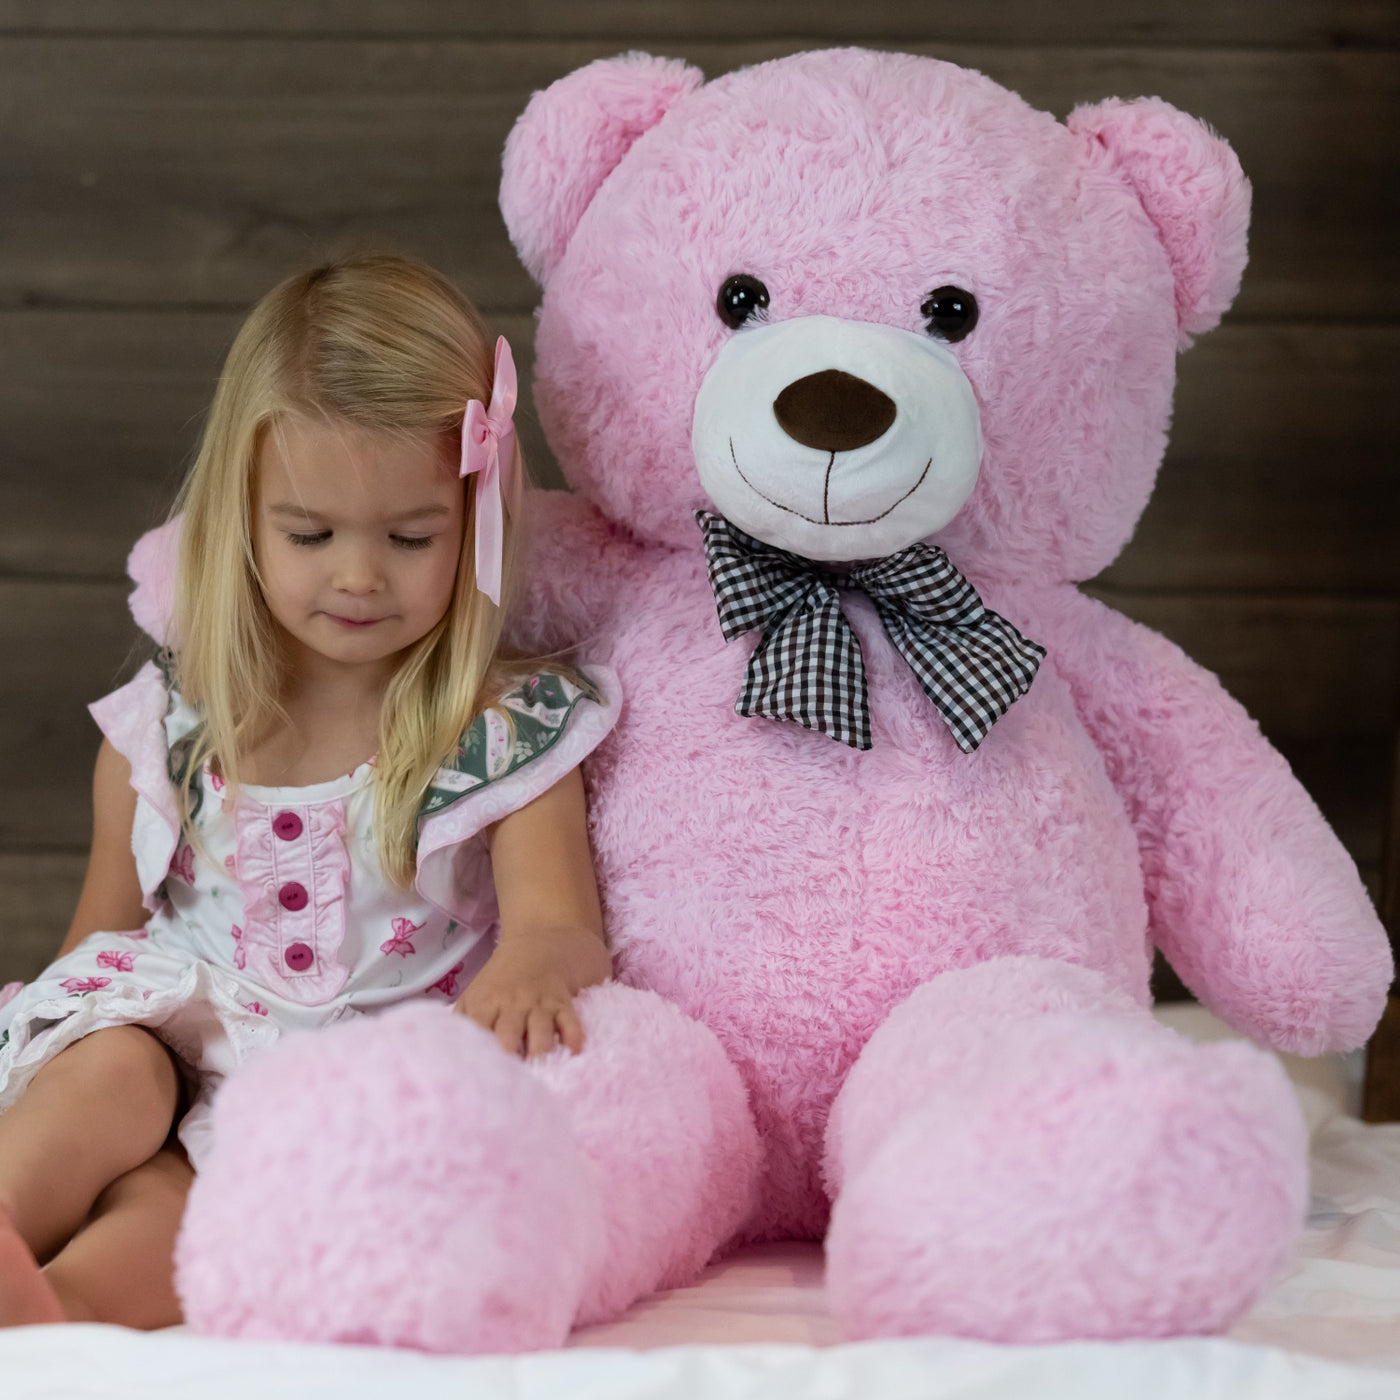 Giant Teddy Bear Stuffed Animal Toy, Pink, 47 Inches